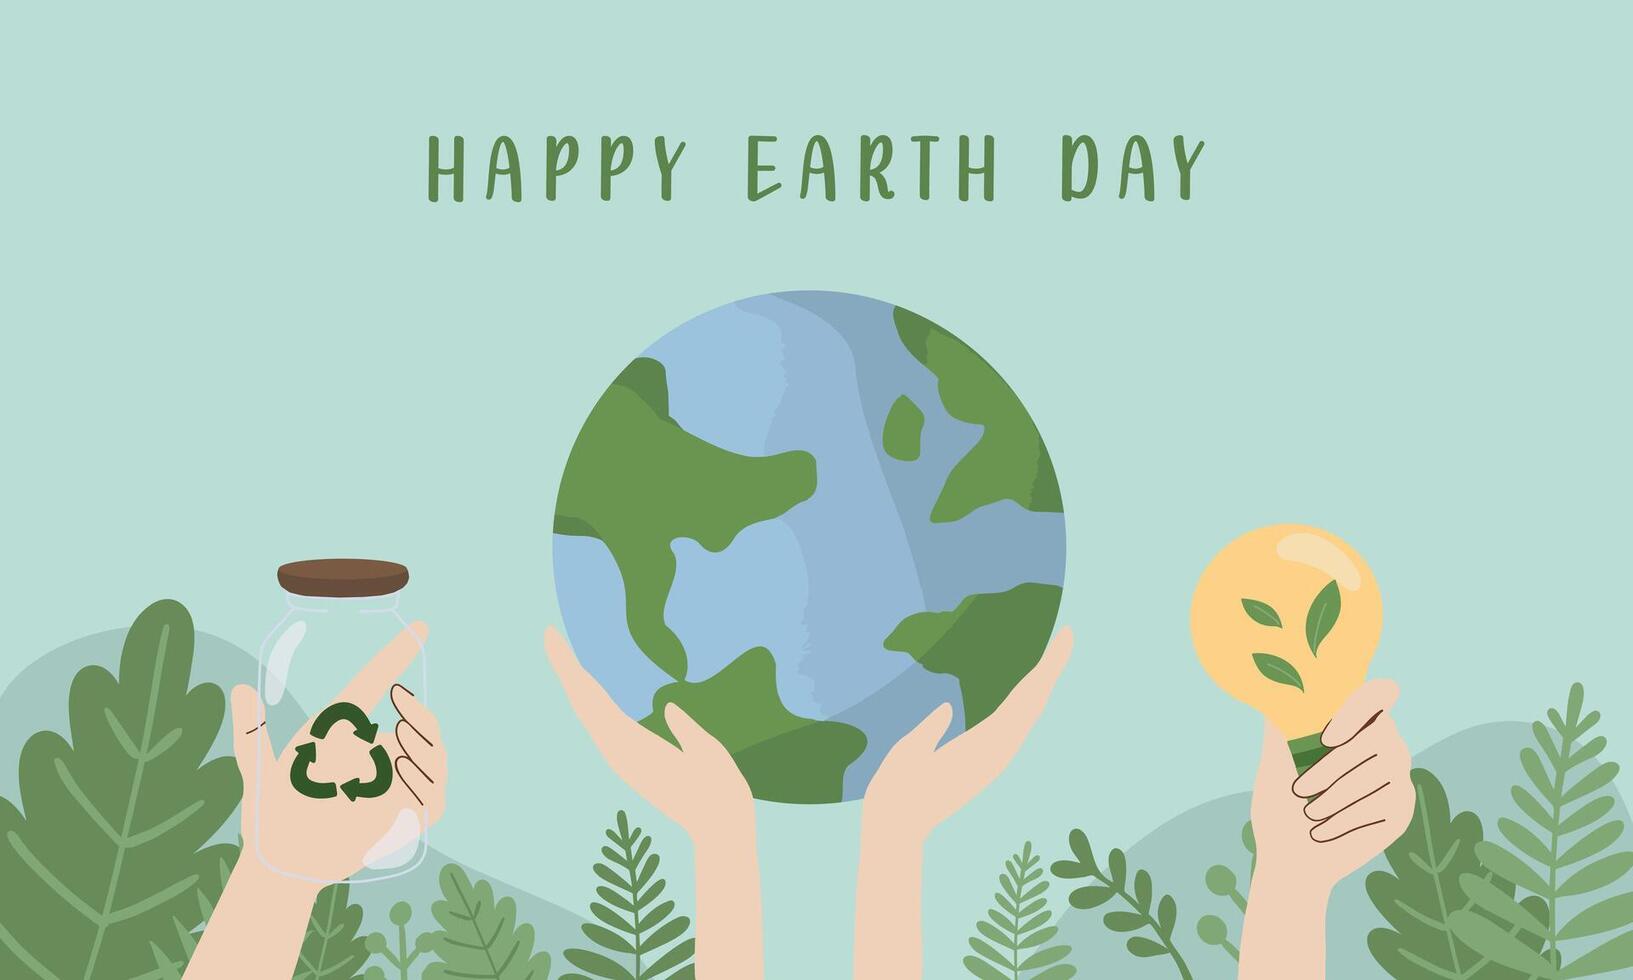 Hand drawn vector illustration of earth day, world environment day concept minimal flat doodle drawing. Hands holding the earth, reusable container, green energy light bulb. For web, banner, media